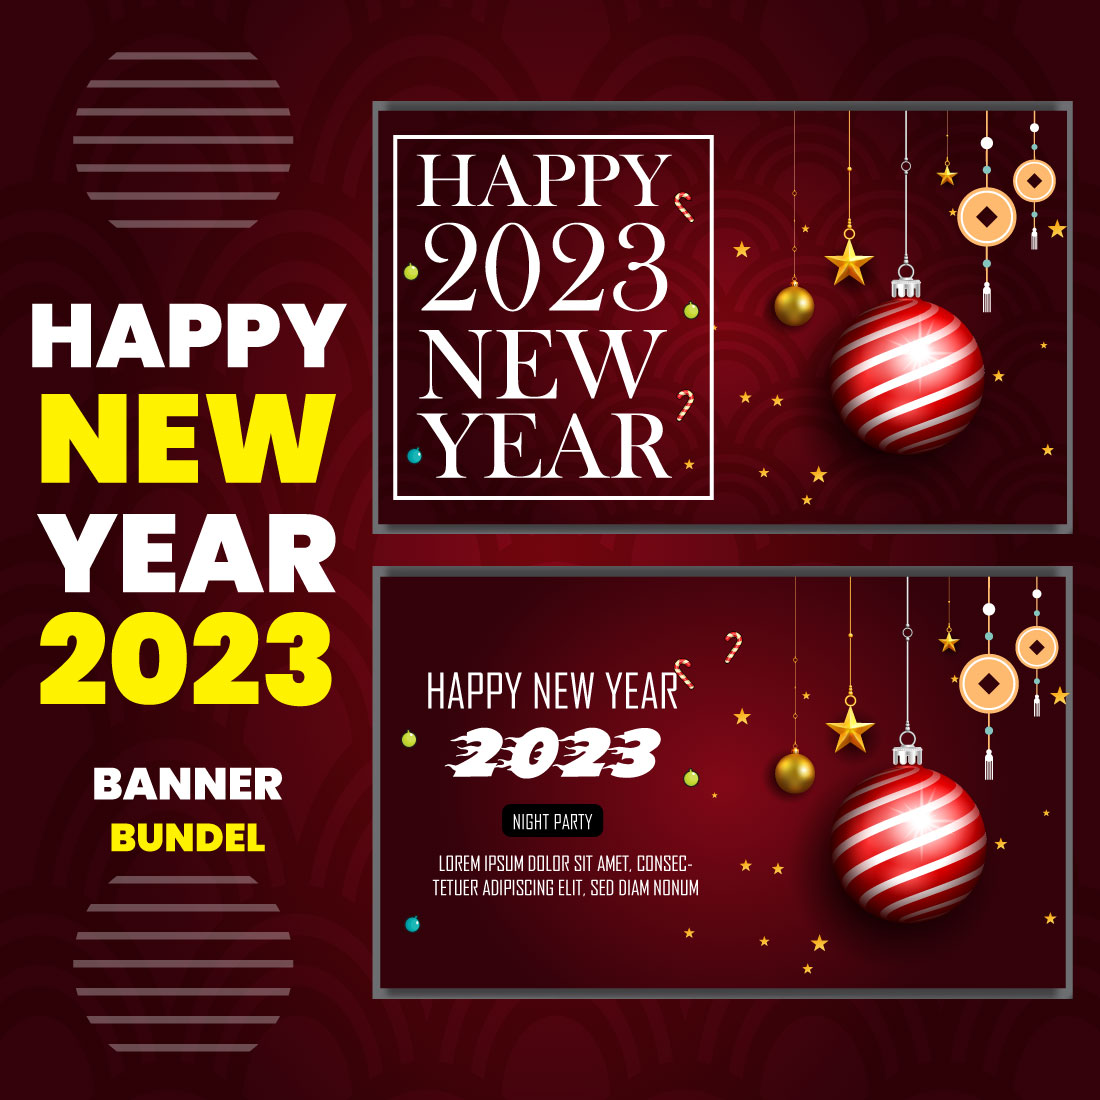 Happy New Year 2023 Banner cover image.